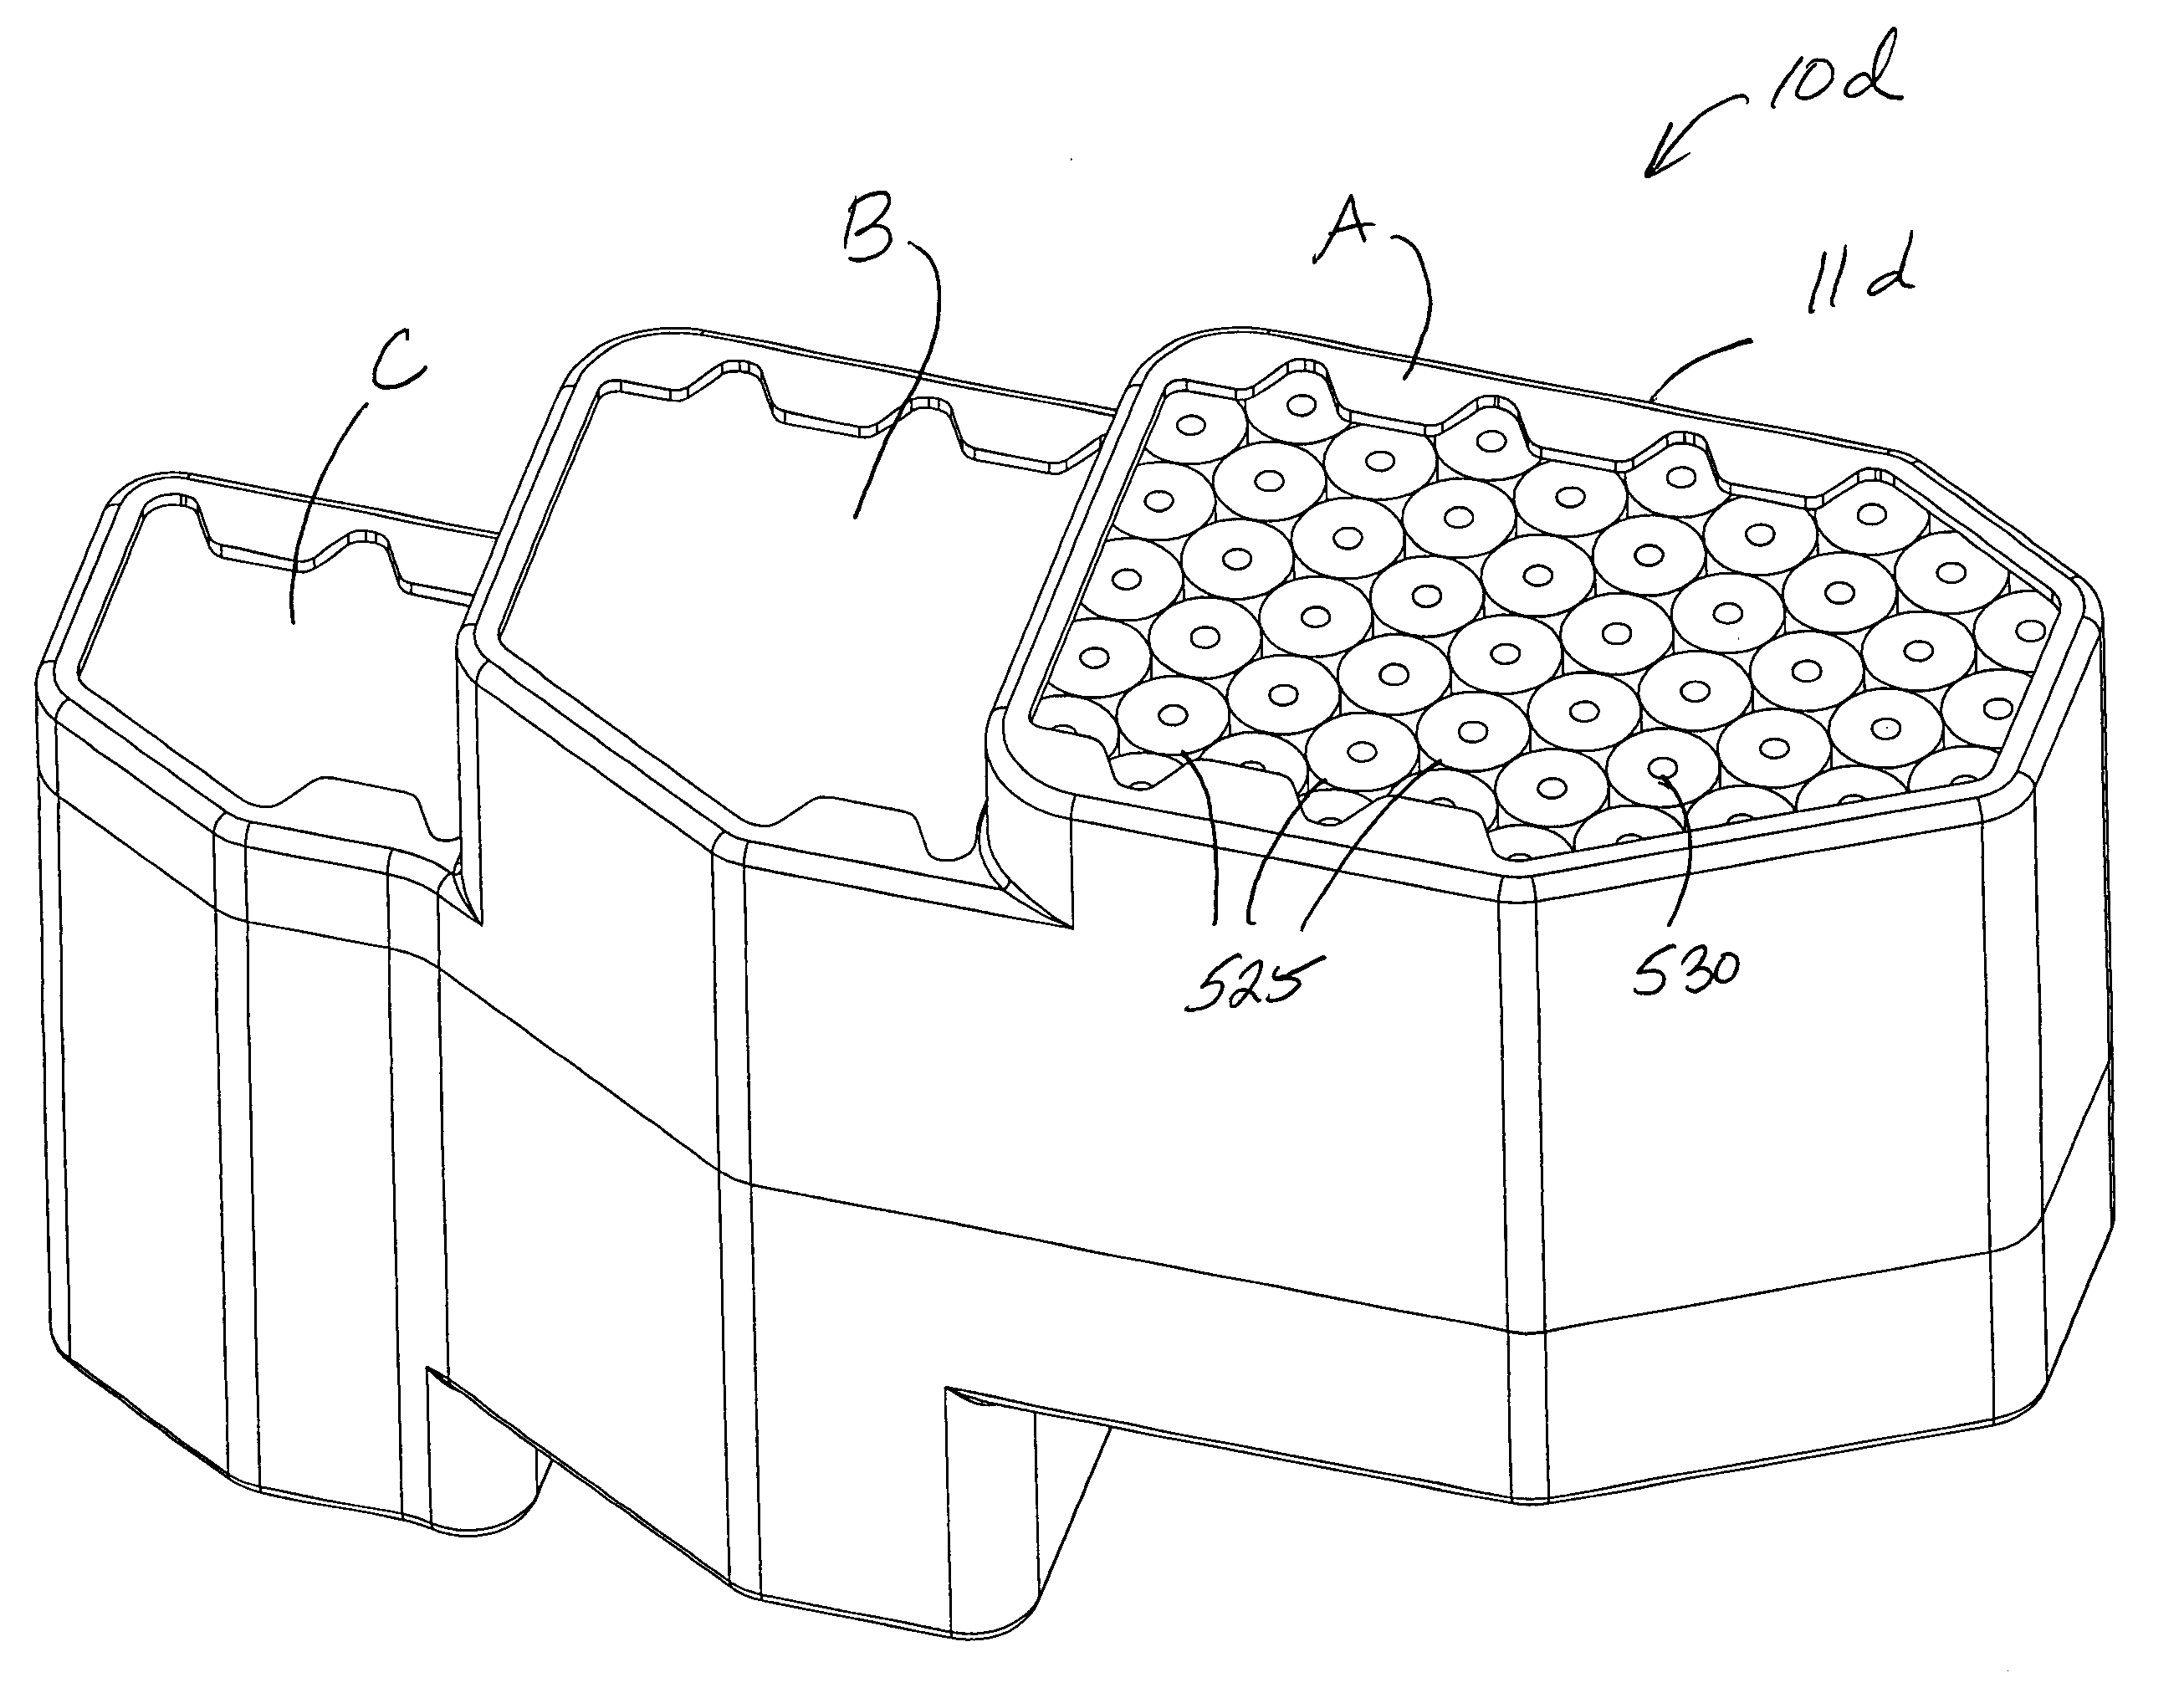 Filter assemblies and systems for intake air for fuel cells